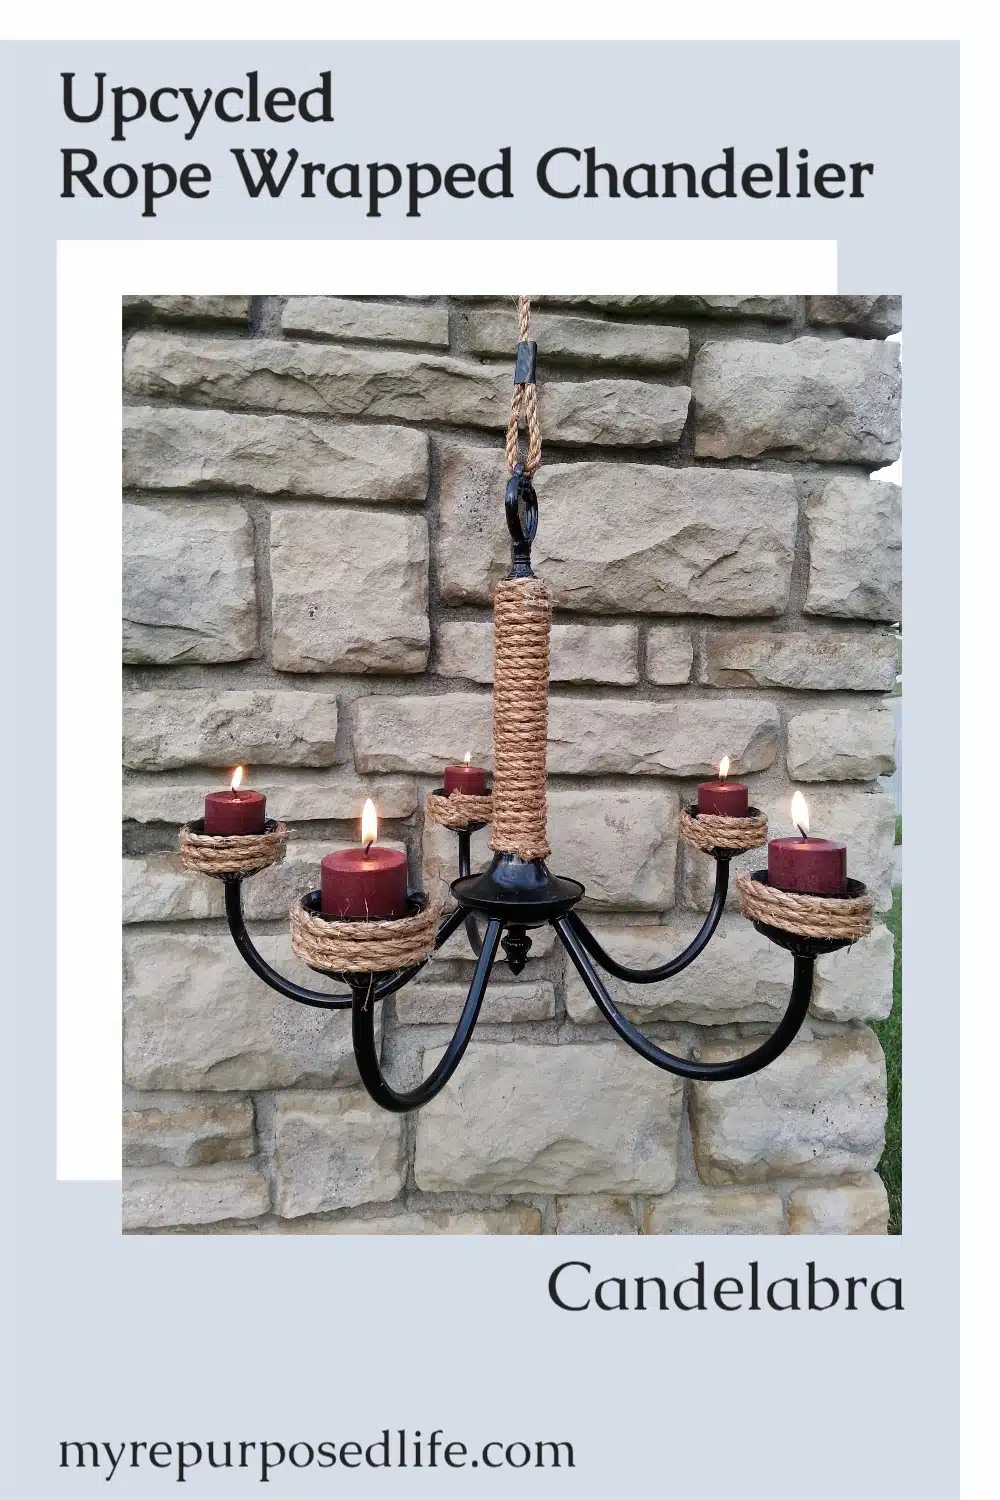 Using a thrift store chandelier, you can make this rope wrapped candelabra. Instead of candles, you could use solar lights. See more ideas for chandeliers while visiting this tutorial. #MyRepurposedLife #repurposed #chandelier #candelabra #outdoor #patio #lighting via @repurposedlife